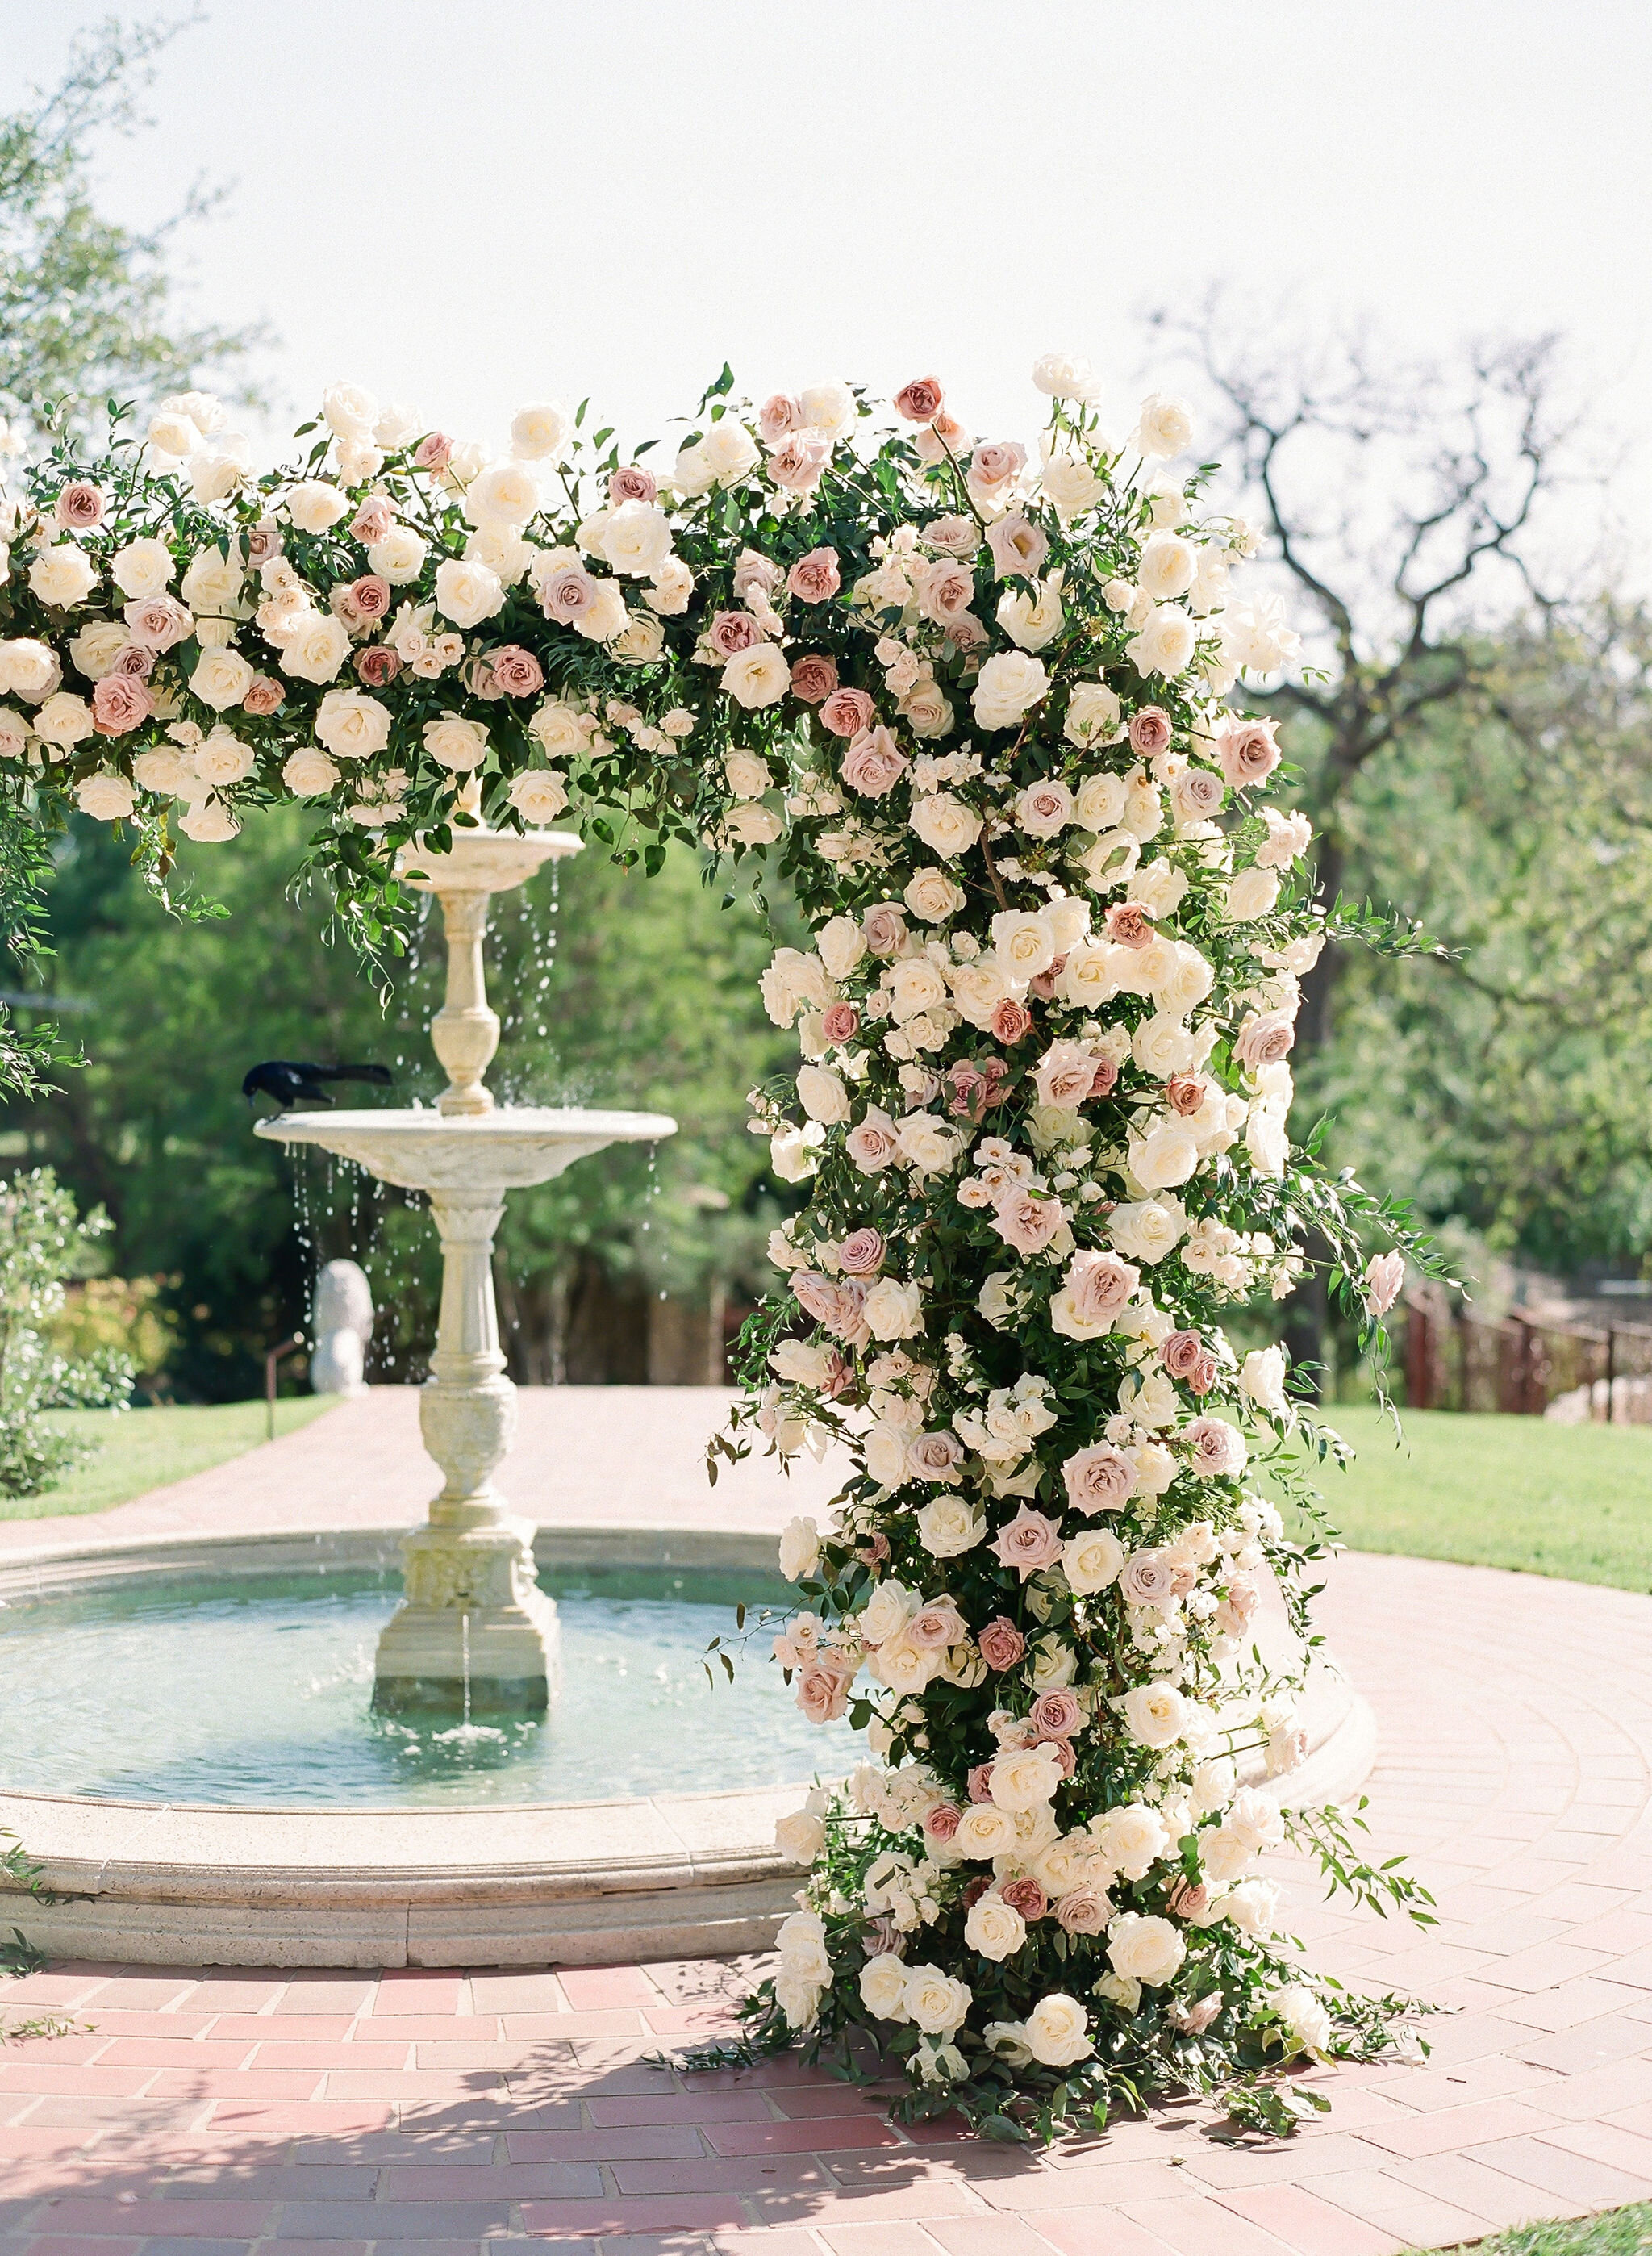 Pink-Champagne-Designs-Floral-Archway-Commodore-Perry-Bride